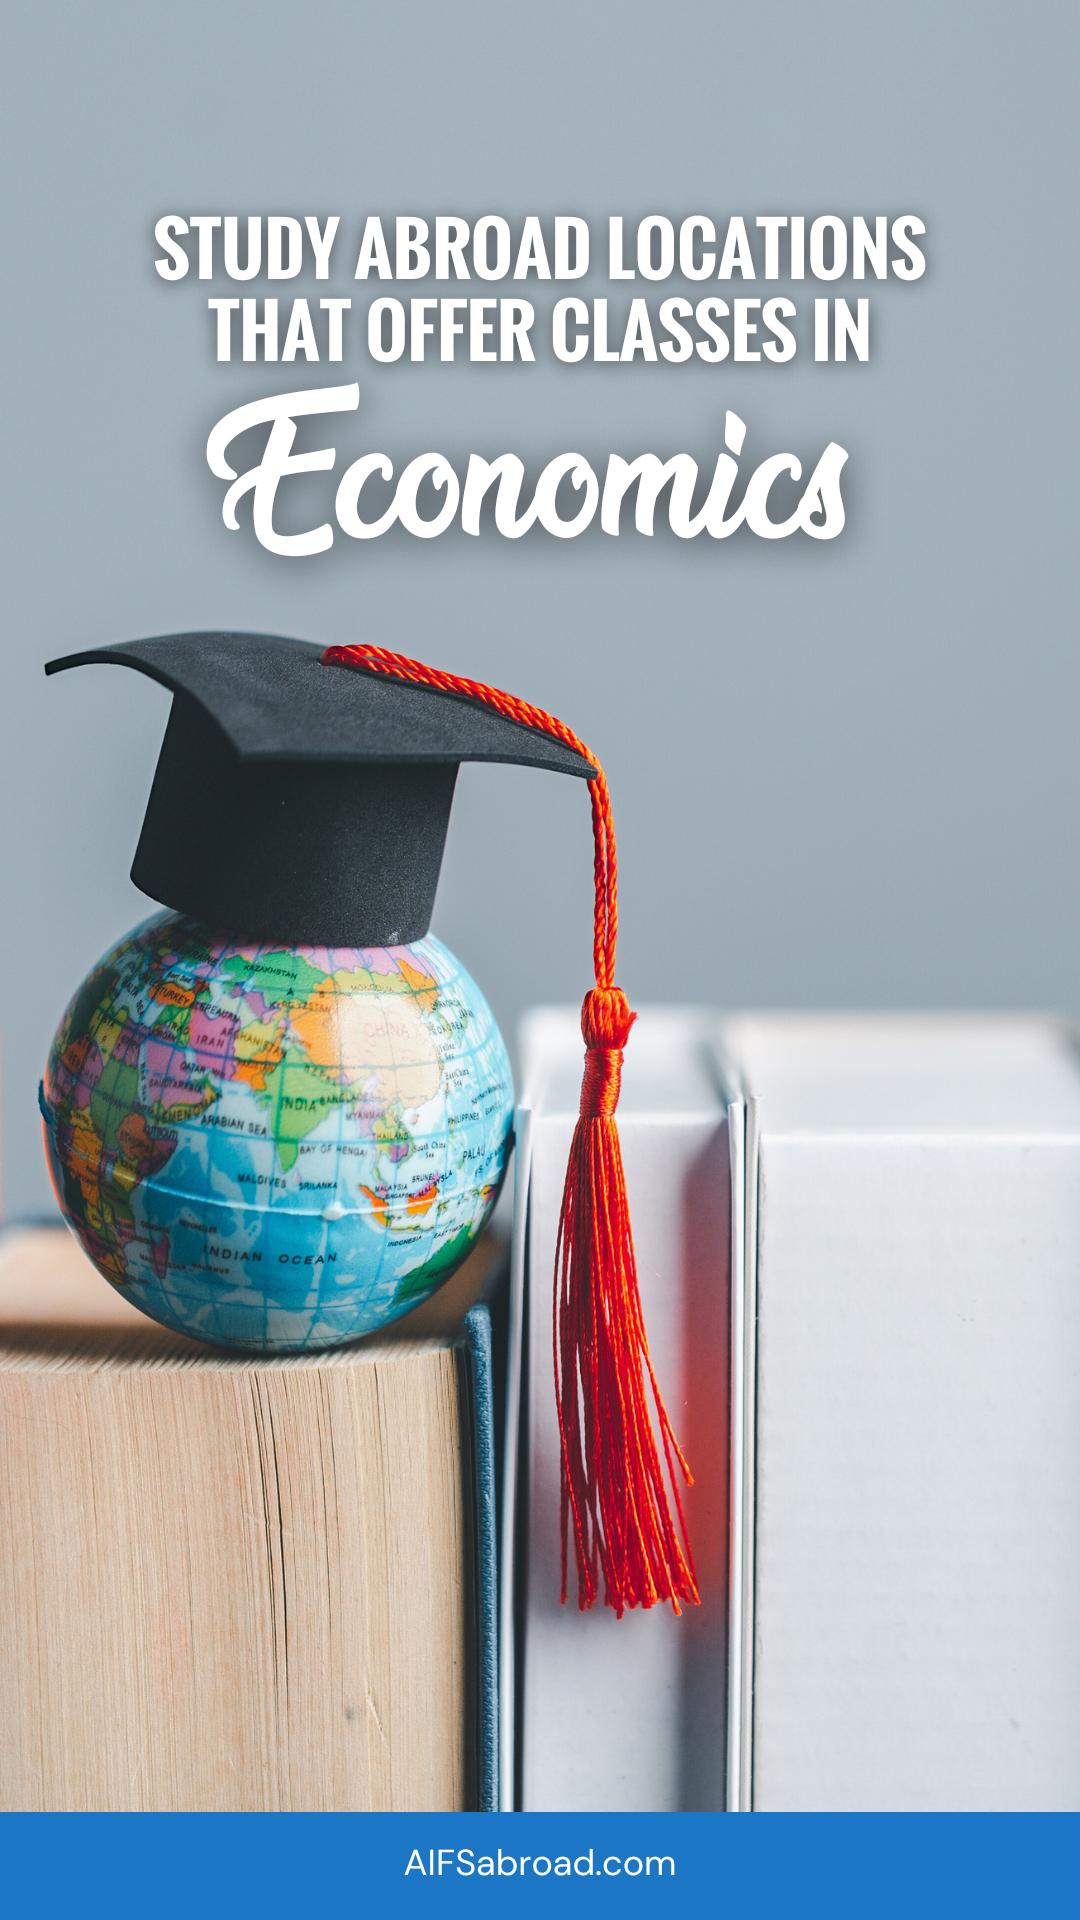 Pin image - books with globe and graduation cap with text overlay "study abroad locations that offer classes in economics"